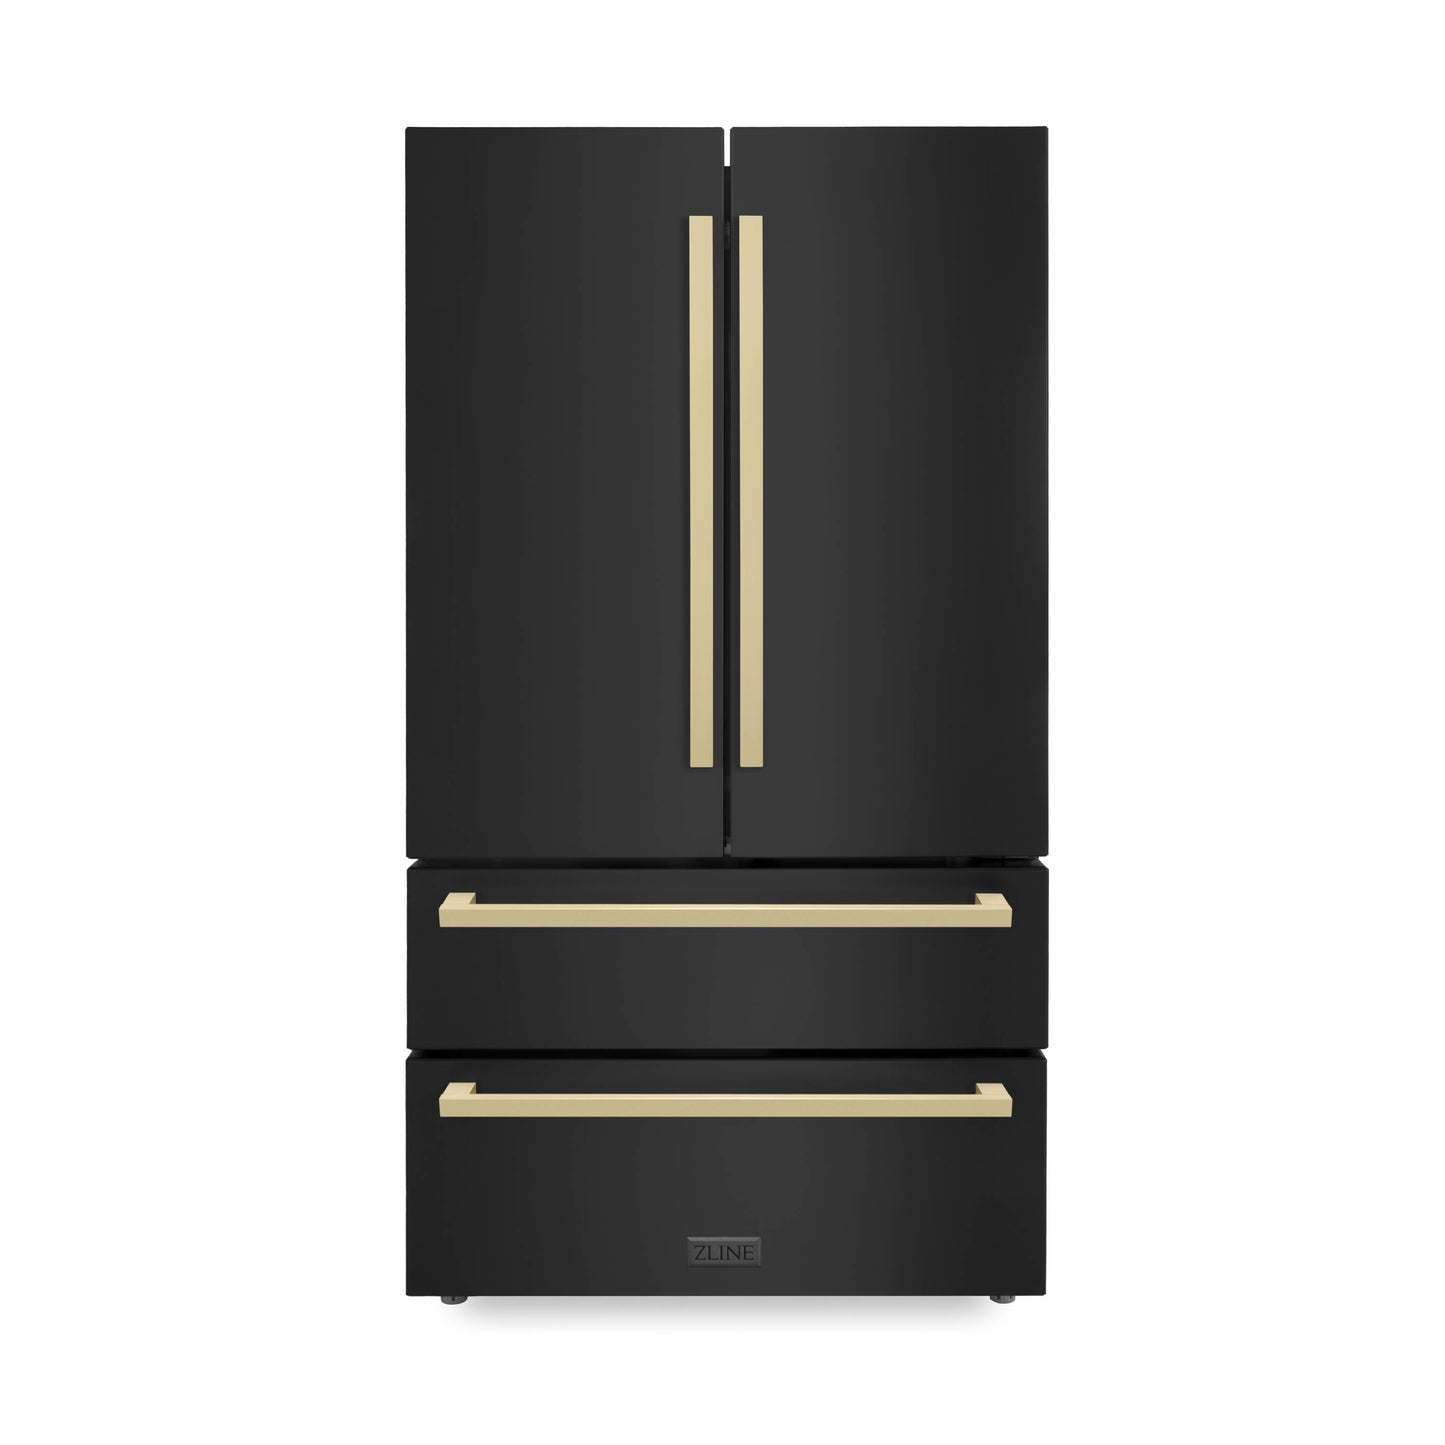 ZLINE 36" Autograph 22.5 cu. ft. Refrigerator with Ice Maker in Black Stainless Steel and Champagne Bronze Square Handles, RFMZ-36-BS-FCB